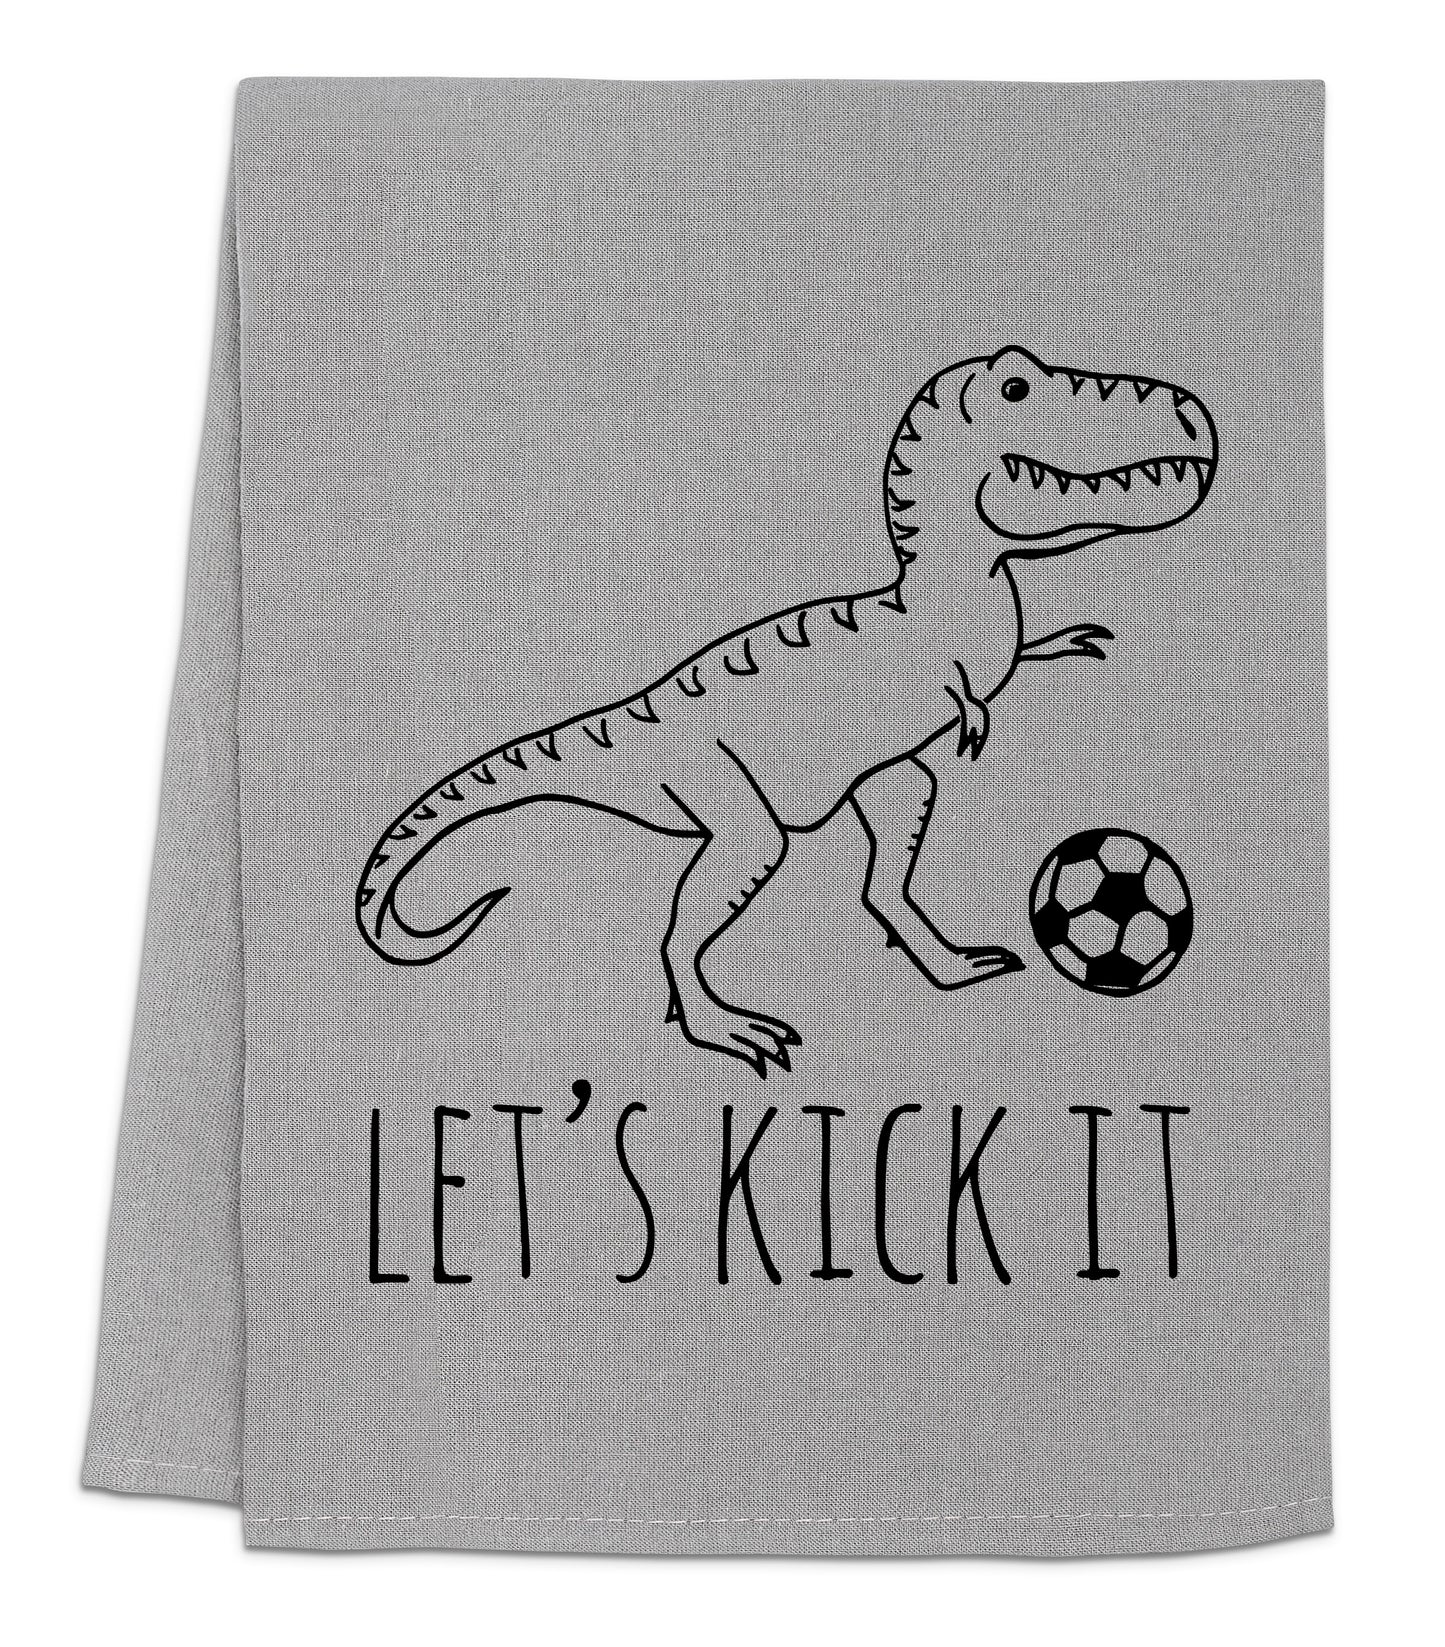 a towel with a dinosaur on it that says let's kick it